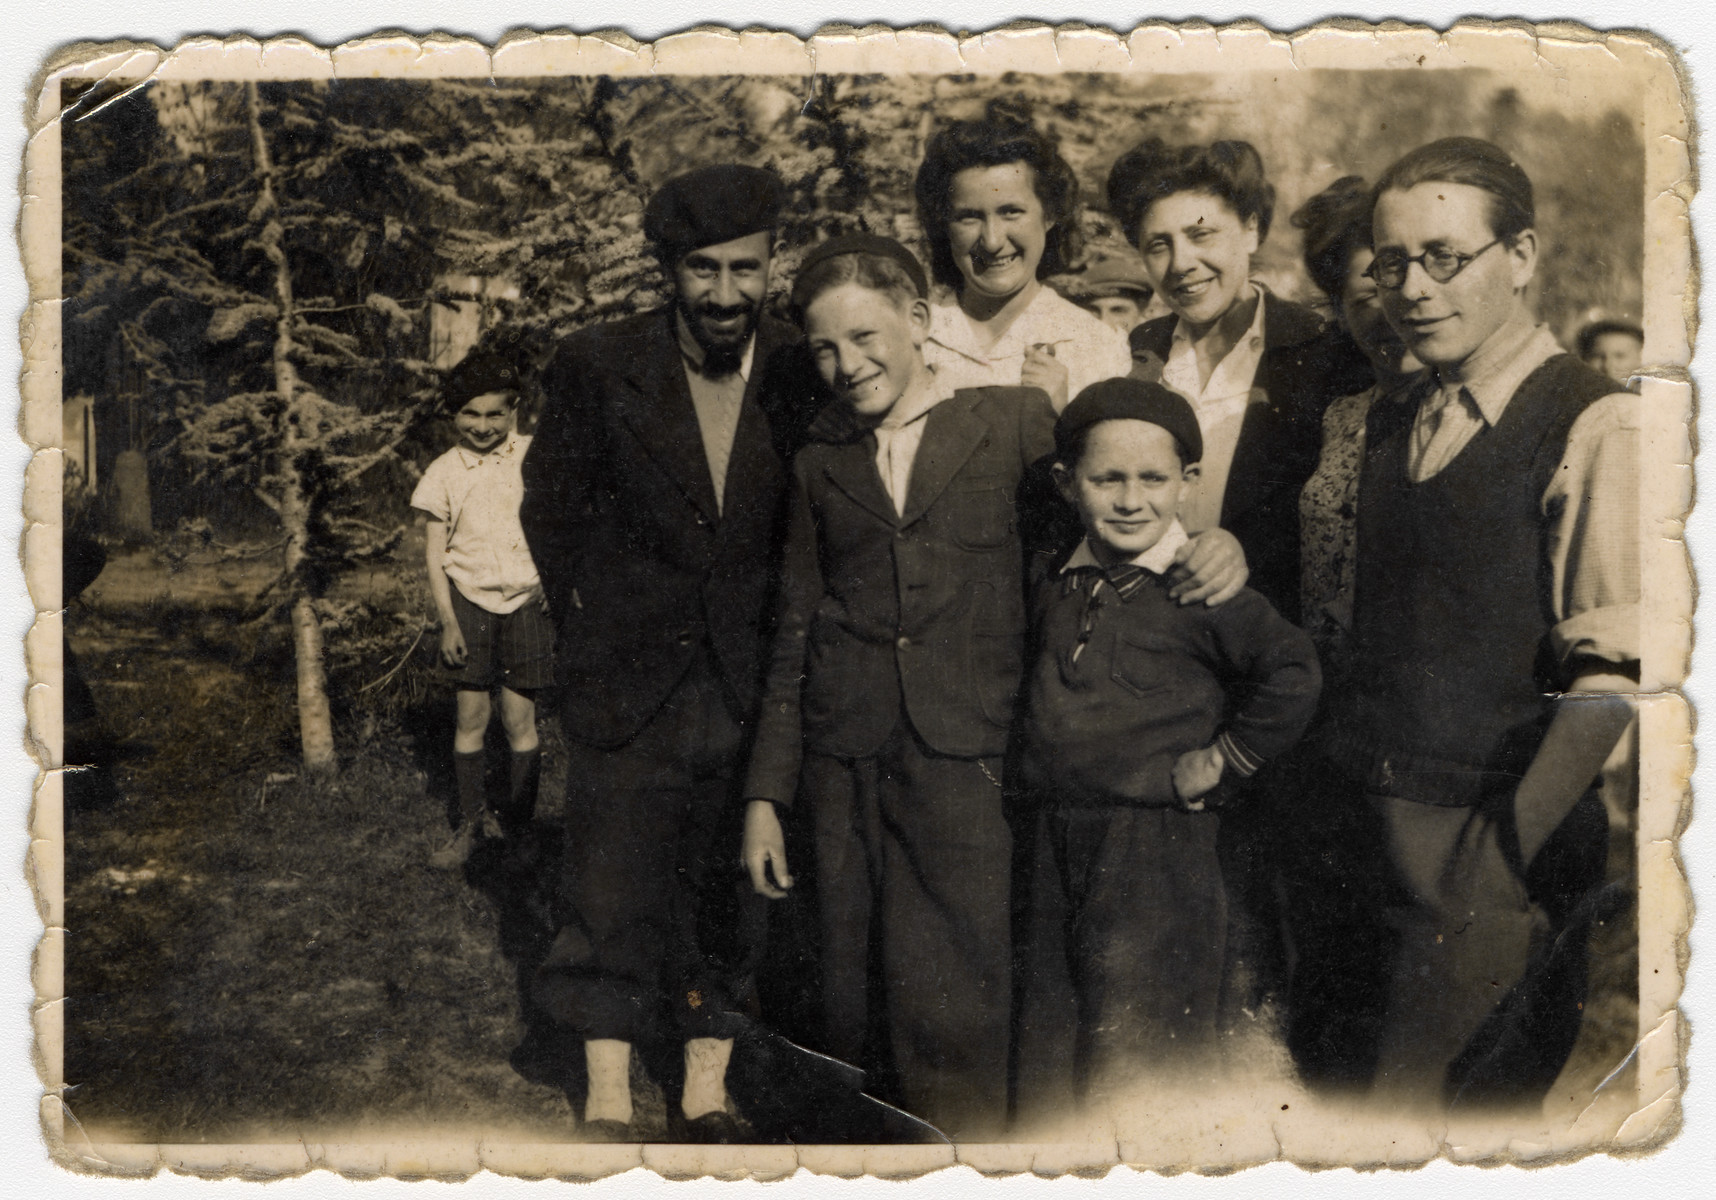 Group portrait of staff and children from the Chateau des Morelles children's home.

Pictured in front are Raphael and Markus Horowitz.  Standing left to right are Mr. Amsel, Myriam (Weichselbaum) Dybnis, Mrs. Brown, and [possibly Henry Dybnis].